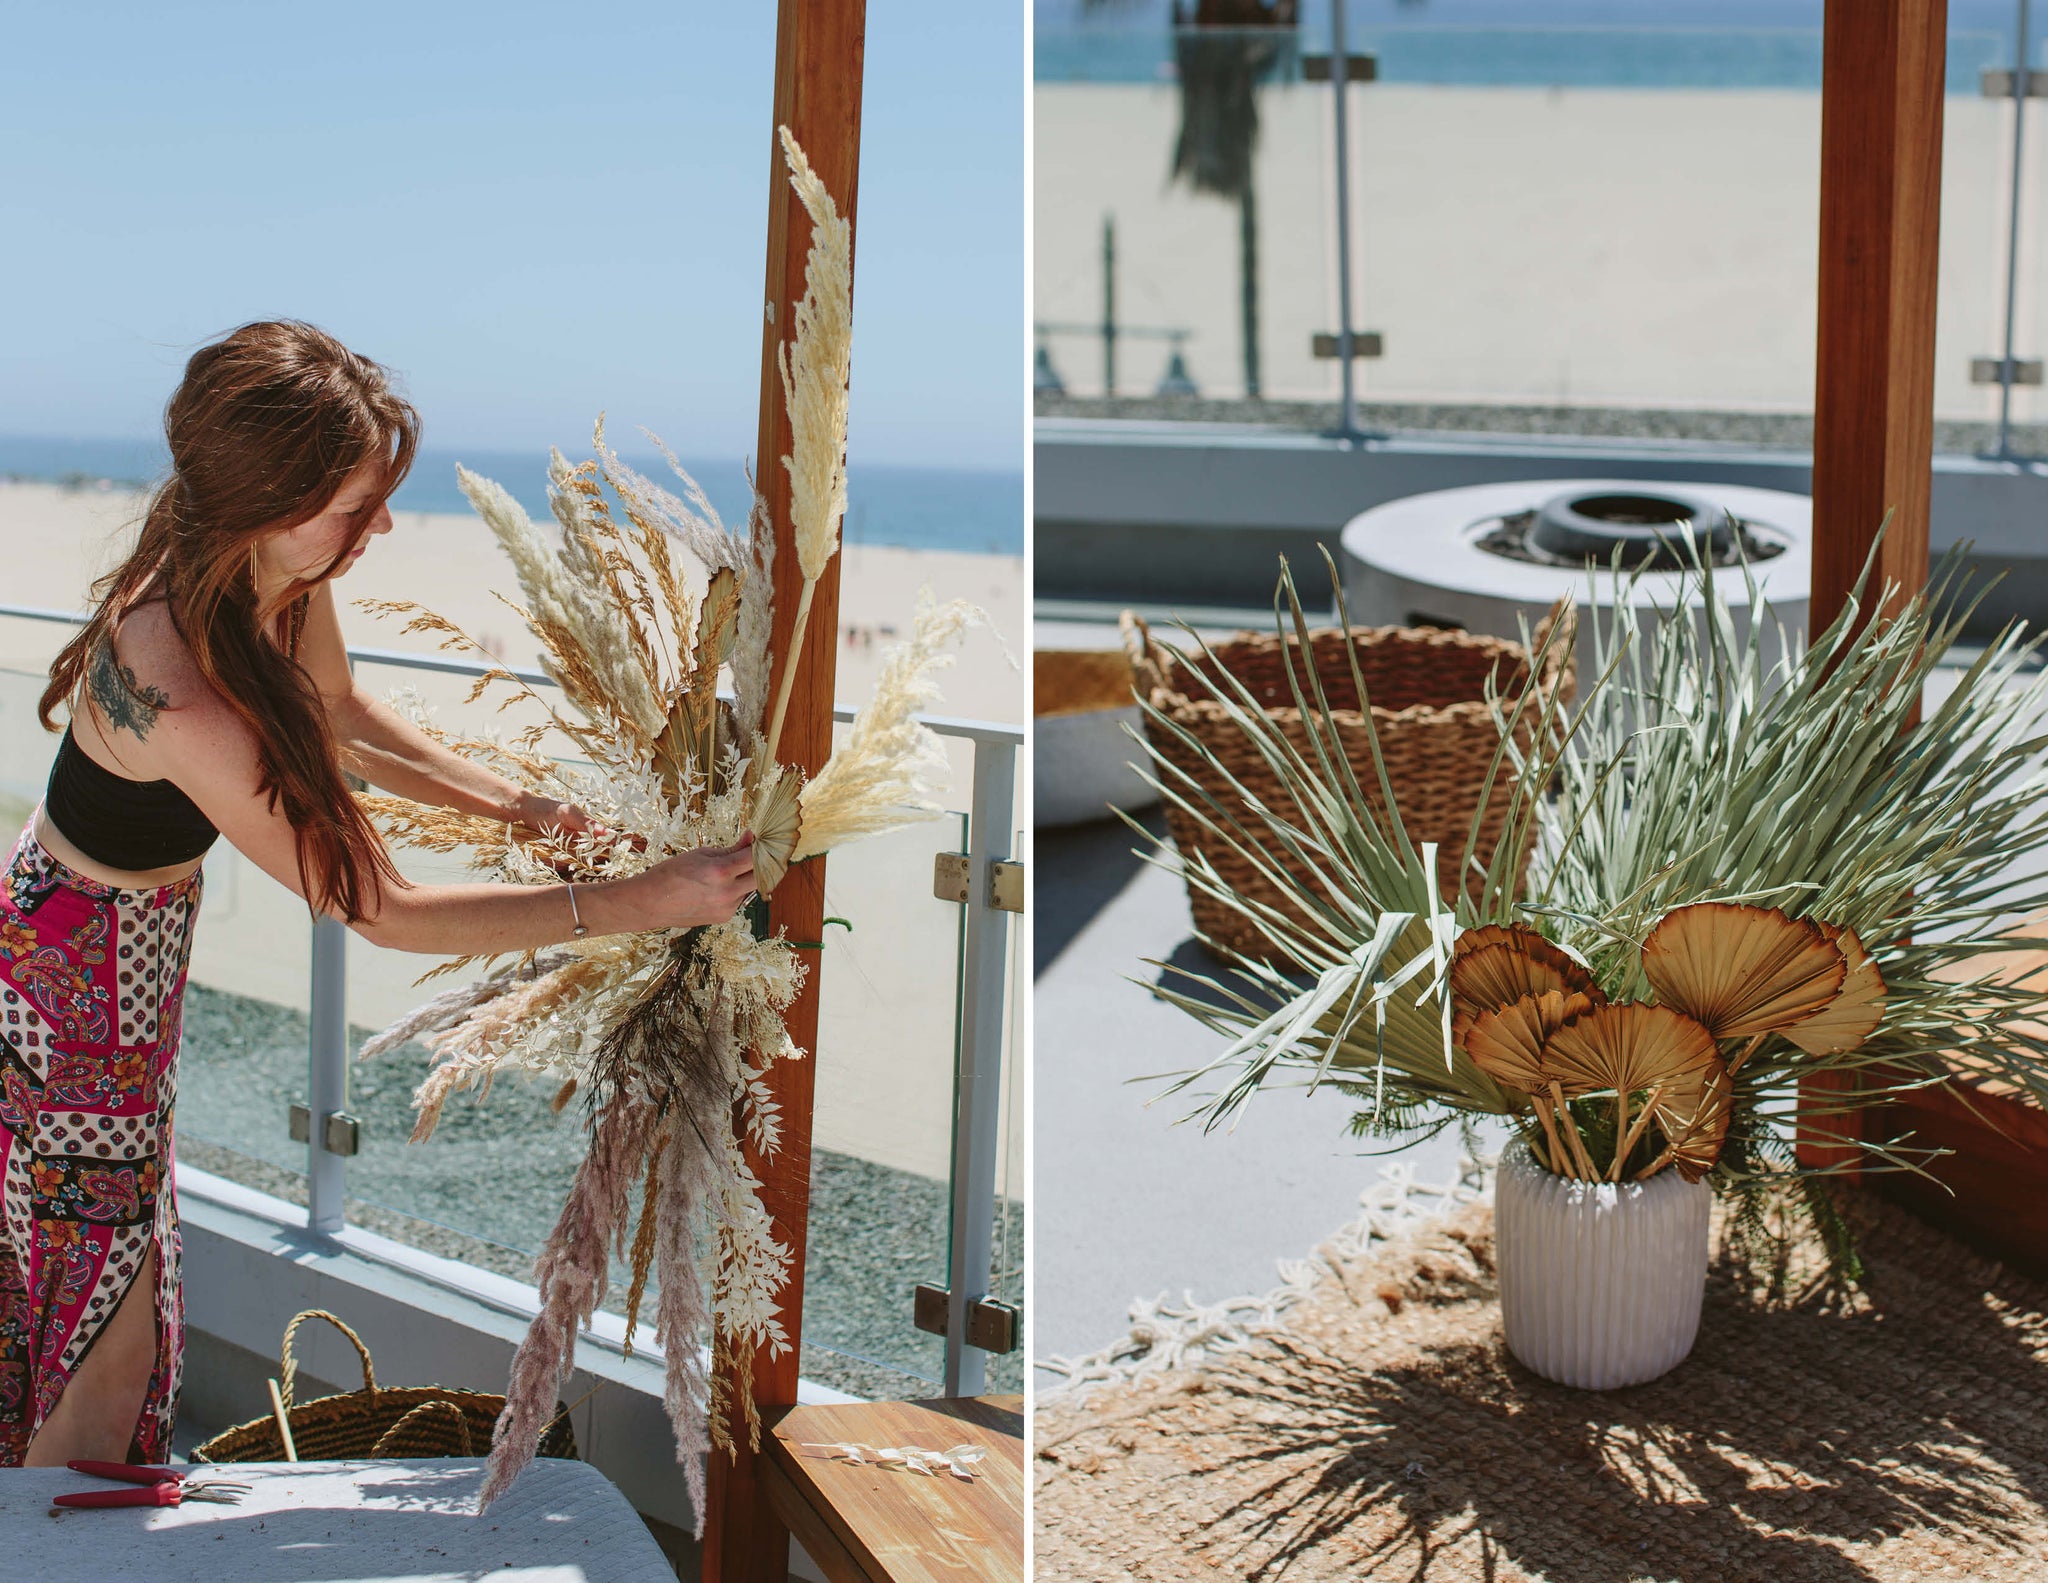 12th Tribe Rooftop Summer Boho Beach Dreams Event | Photographer @theeternalchild | The Eternal Child Sashi Venice Wildflora Los Angeles florist Ventura Blvd Studio City California Original Farmers Market The Grove flower delivery bouquet floral event special color palette neutral beige sand sand brown pale light pastel pink green gold maroon dried muted white ceramic planter pottery container woven basket pampas grass black palm fan variegated rug fire place redhead shoulder tattoo installation